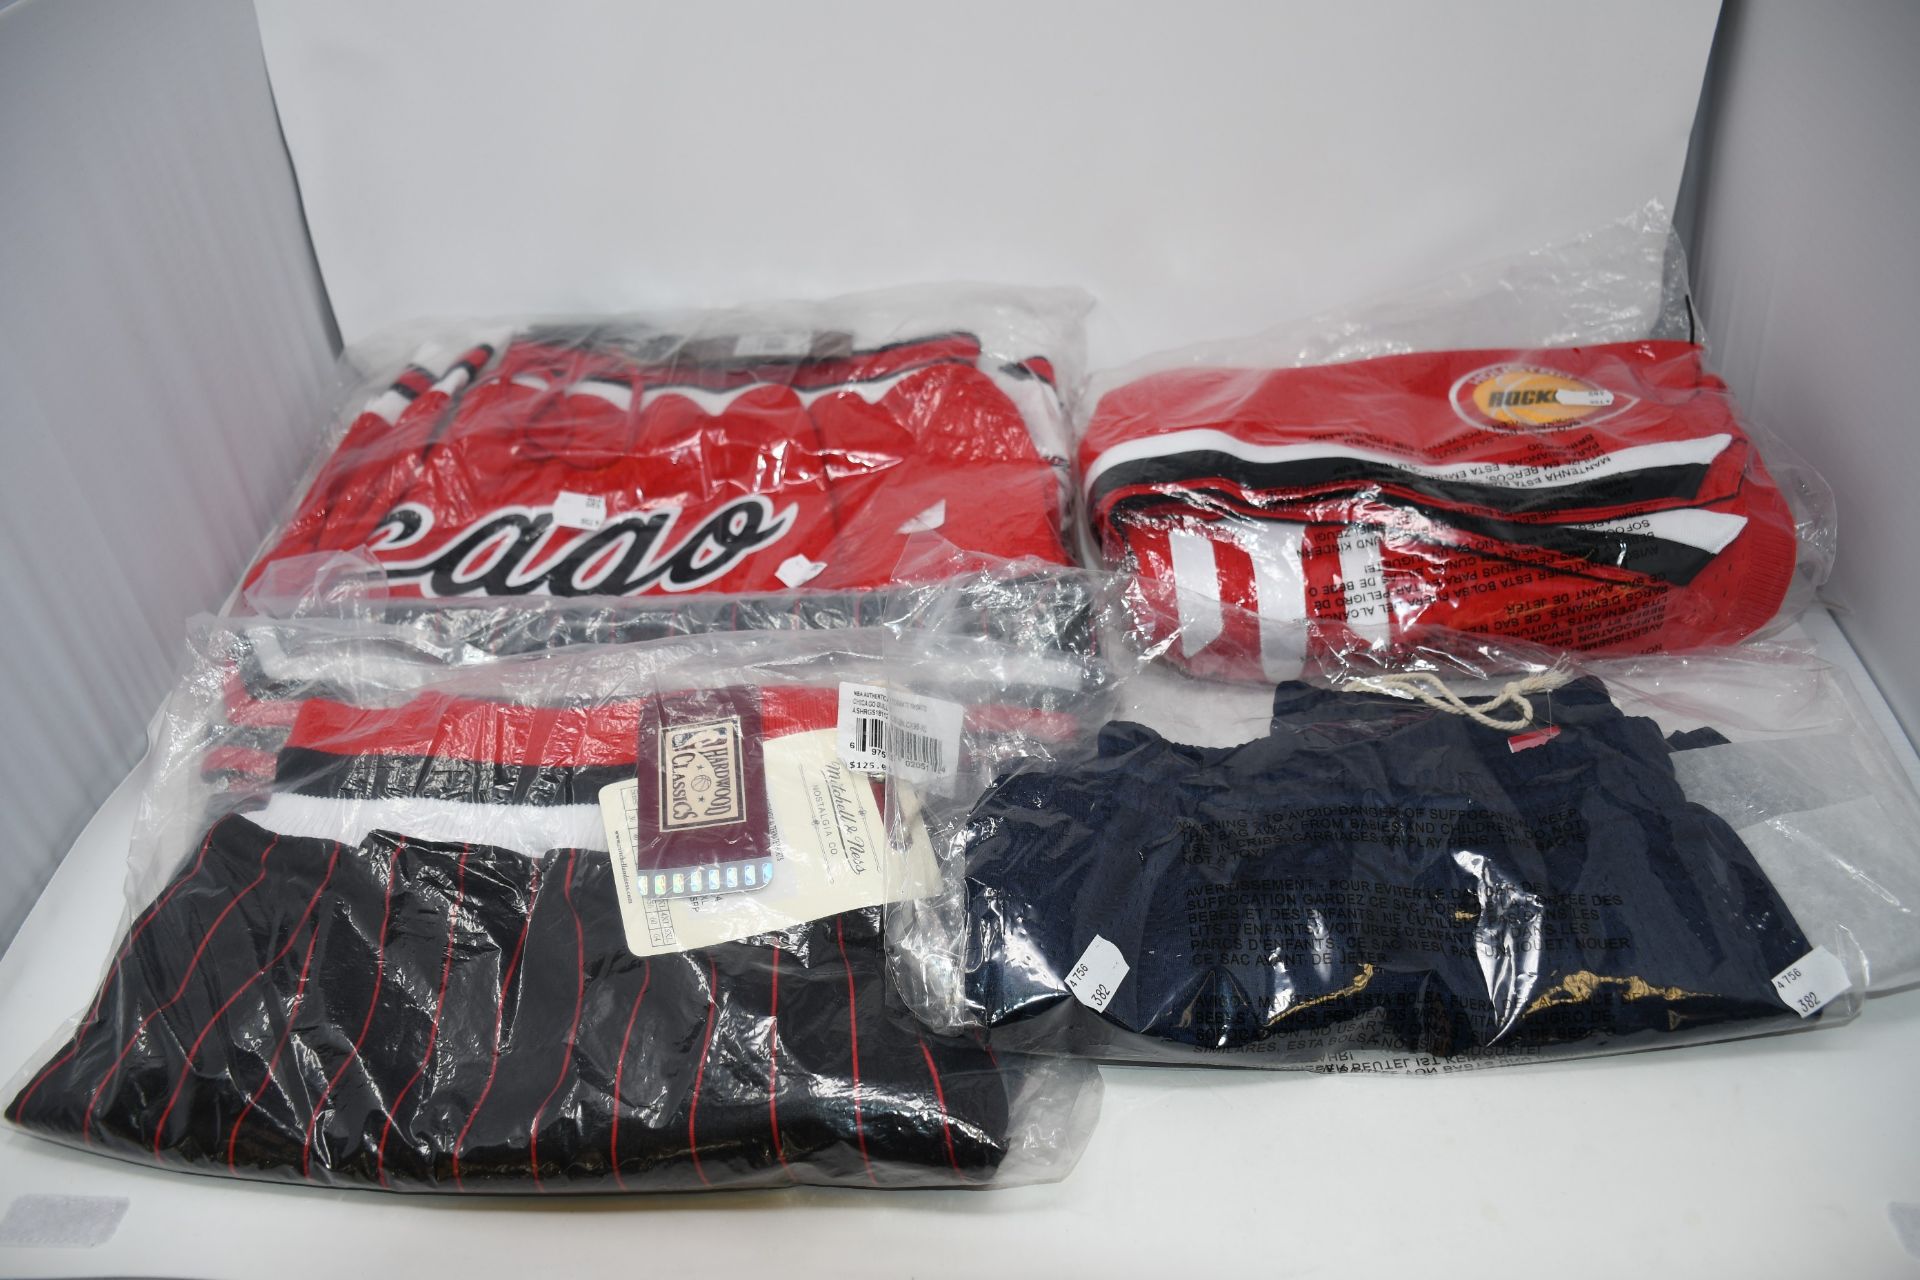 One as new Mitchell and Ness Short bulls shorts size XXL (SHORNG13322). One as new Mitchell and Ness